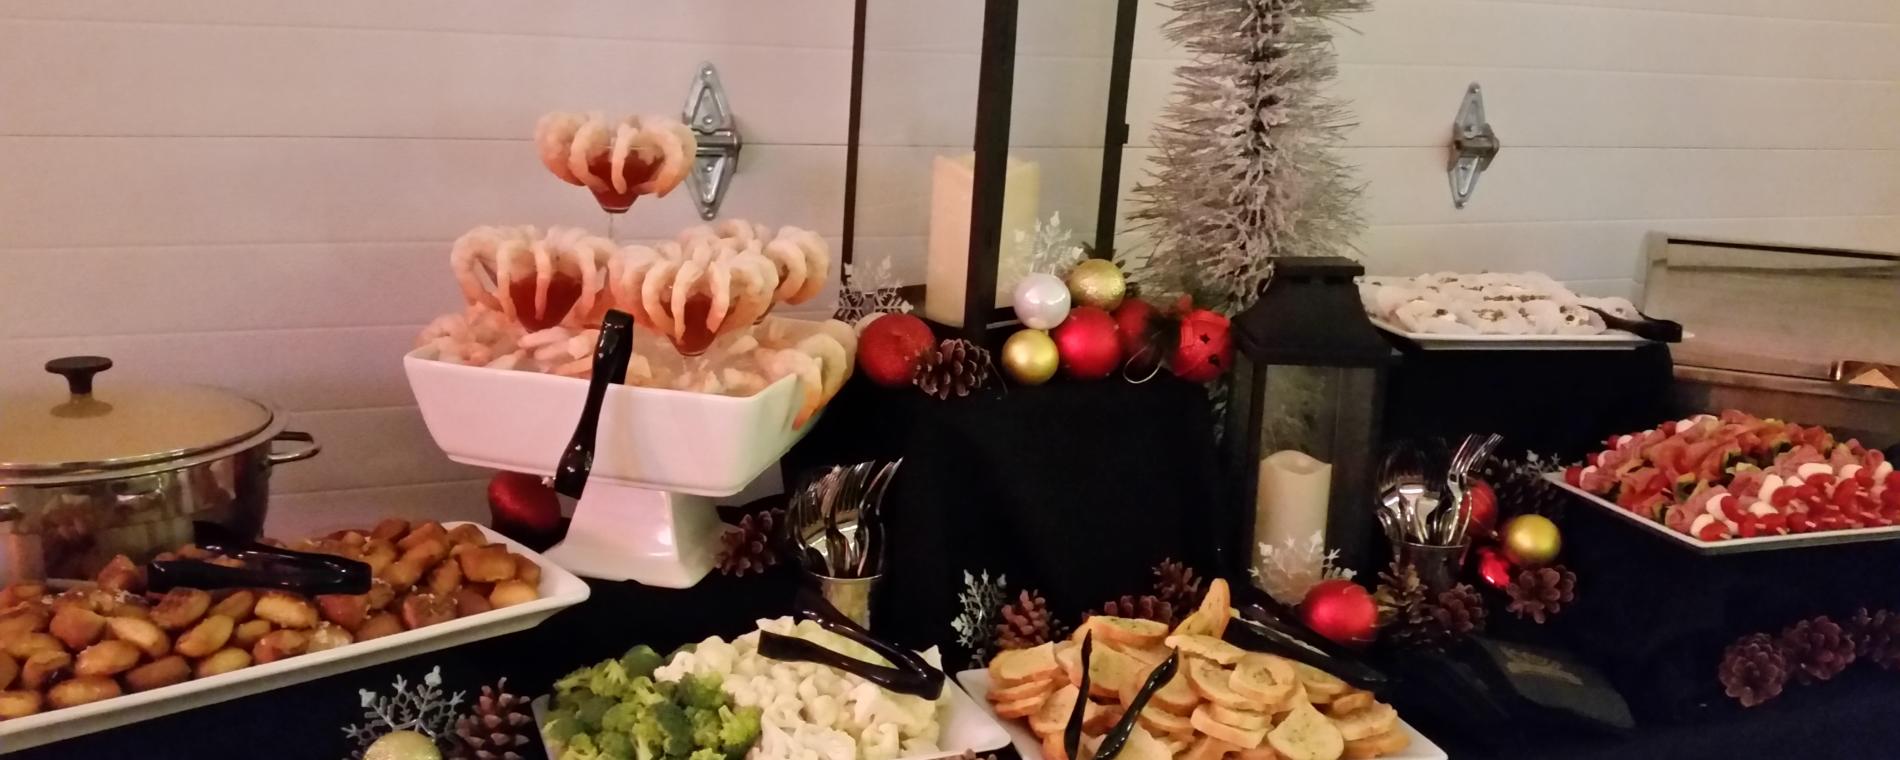 Culinary Catering appetizers Visit Wichita